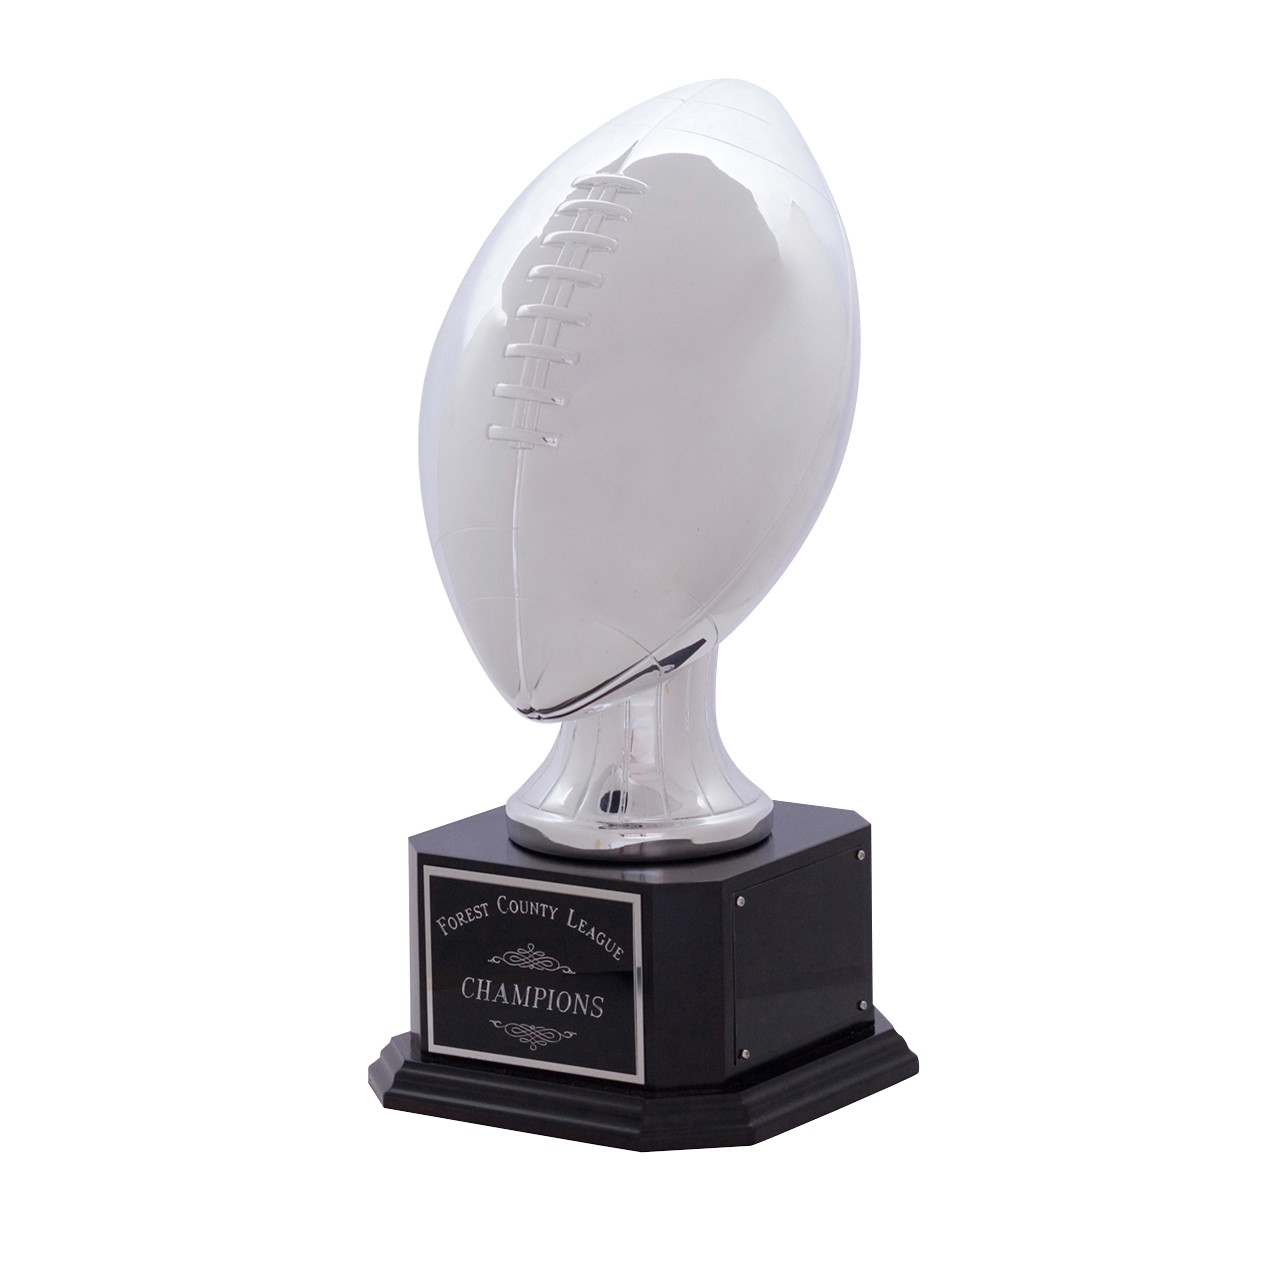 STAND UP FOOTBALL SILVER COLOR HEAVY RESIN AWARD TROPHY 